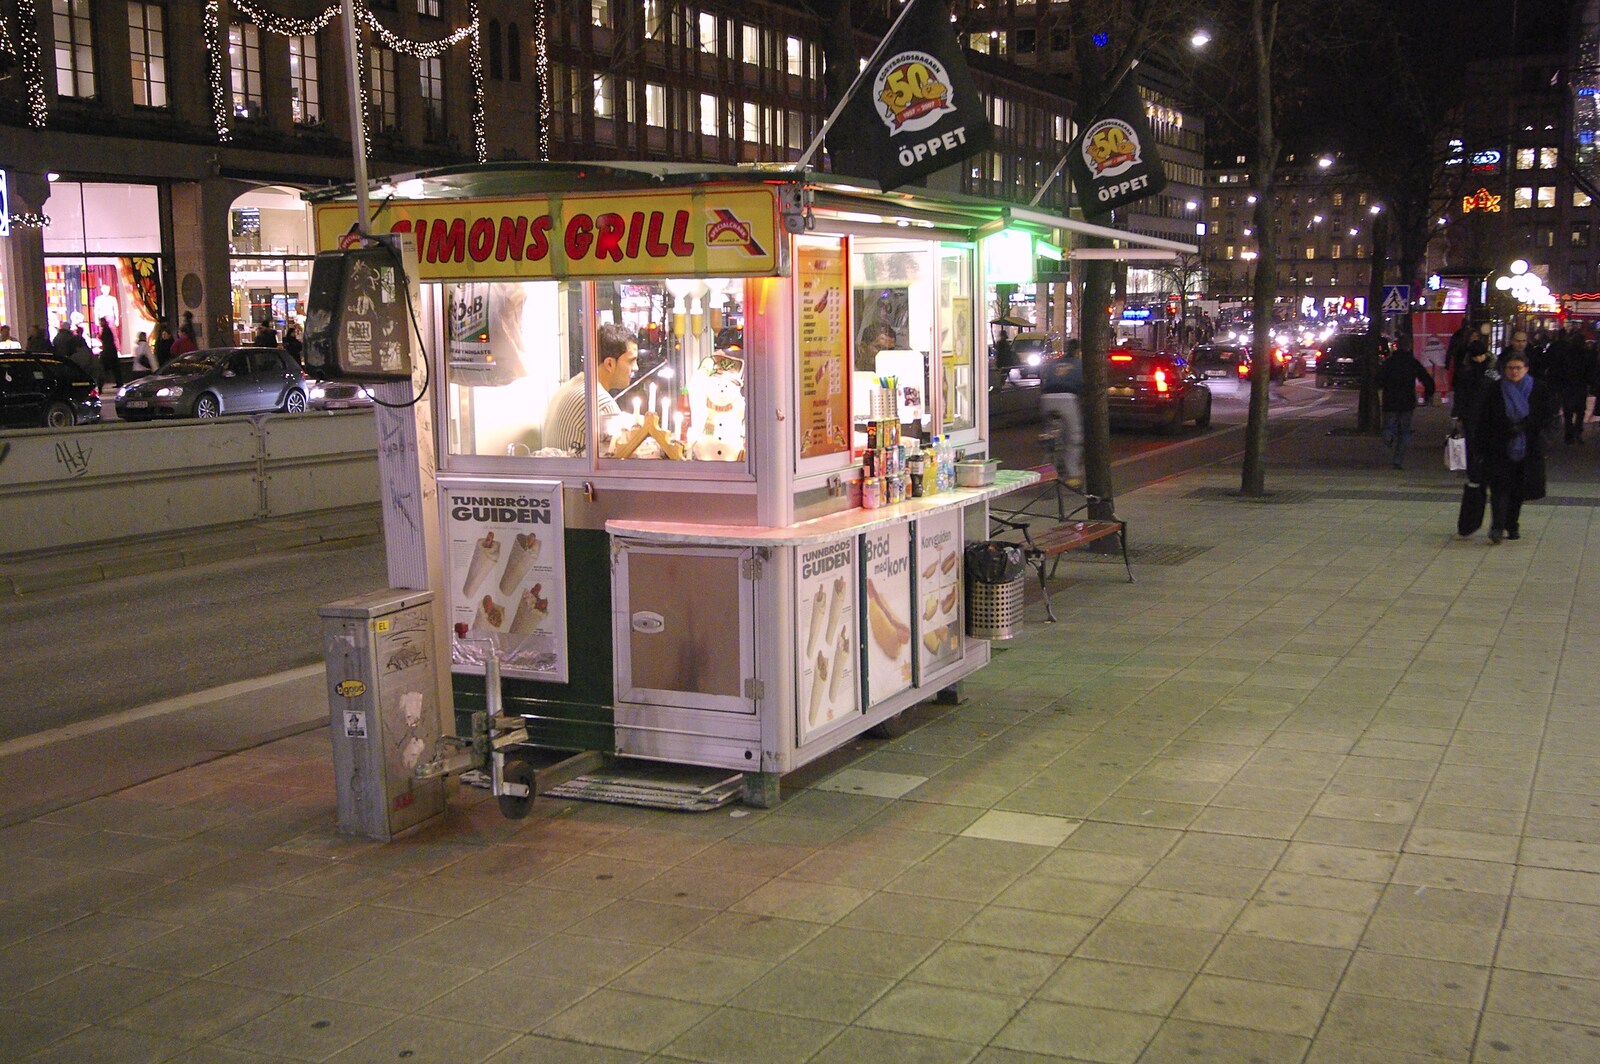 Nosher has his own food stall from Gamla Stan, Stockholm, Sweden - 15th December 2007